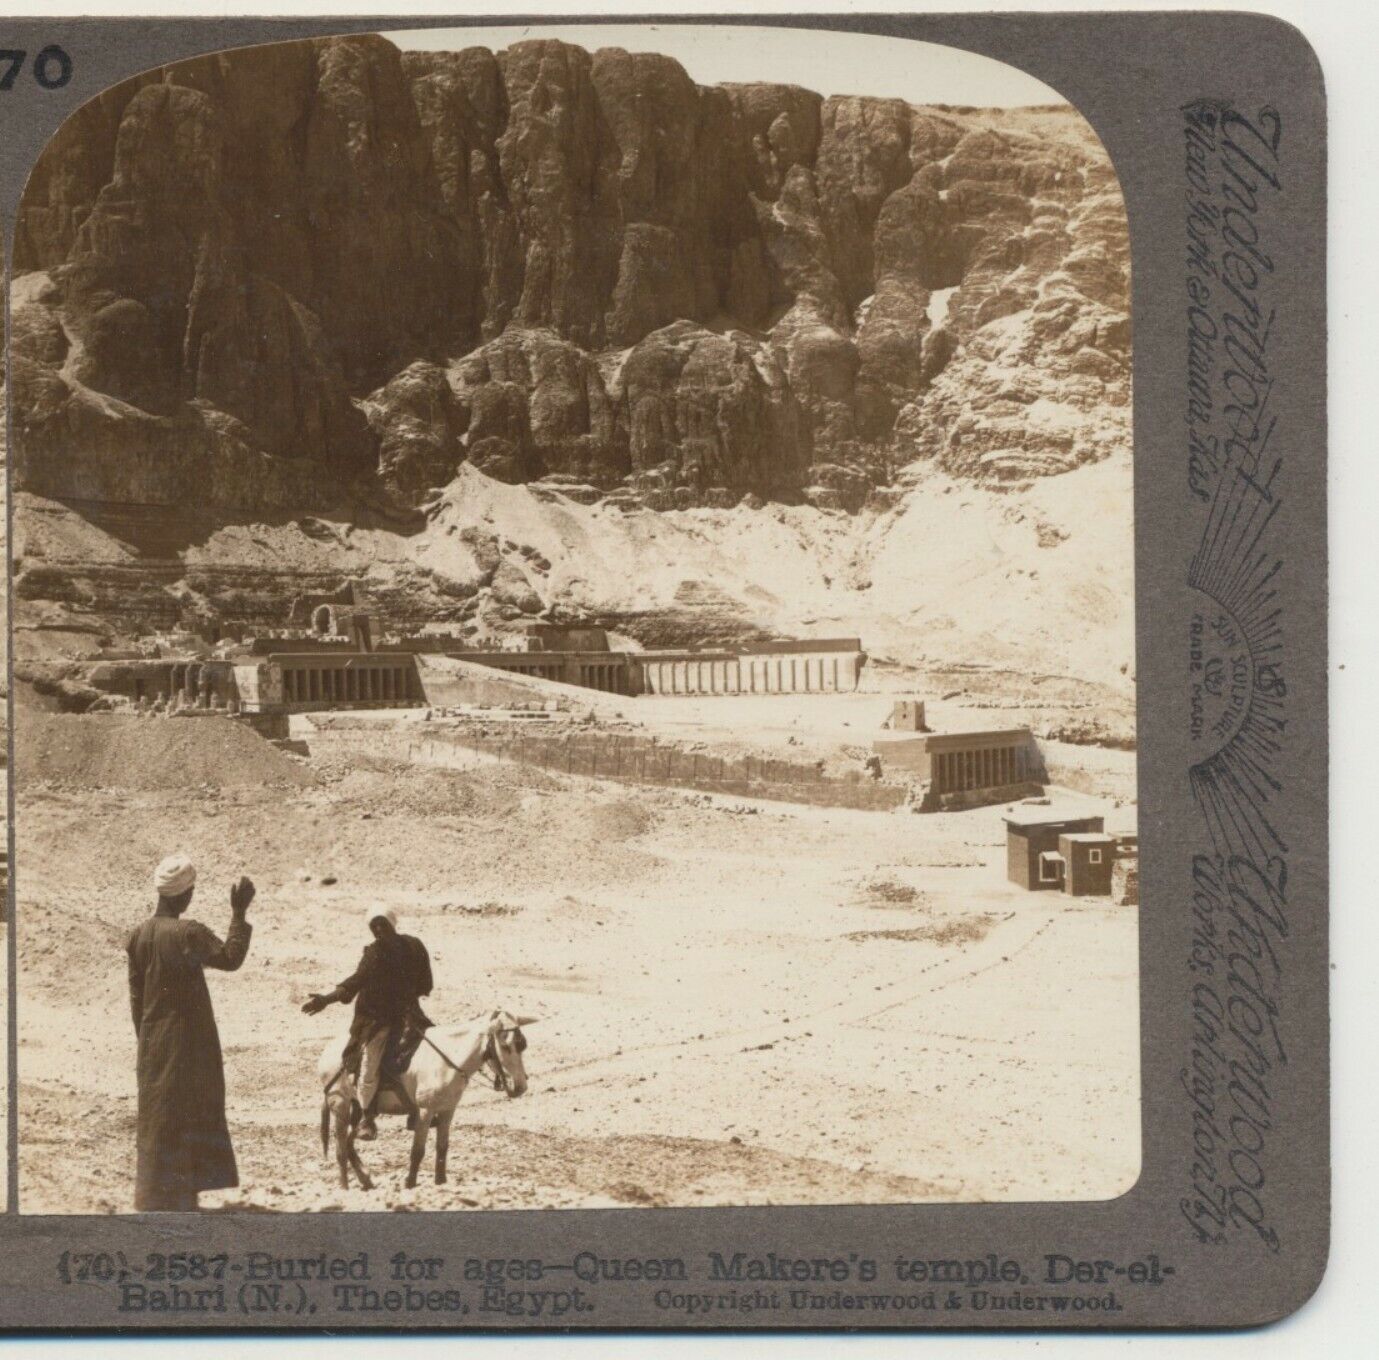 Egyptian Mule Queen Makere's Temple Der-El-Bahri Thebes Egypt Stereoview c1900